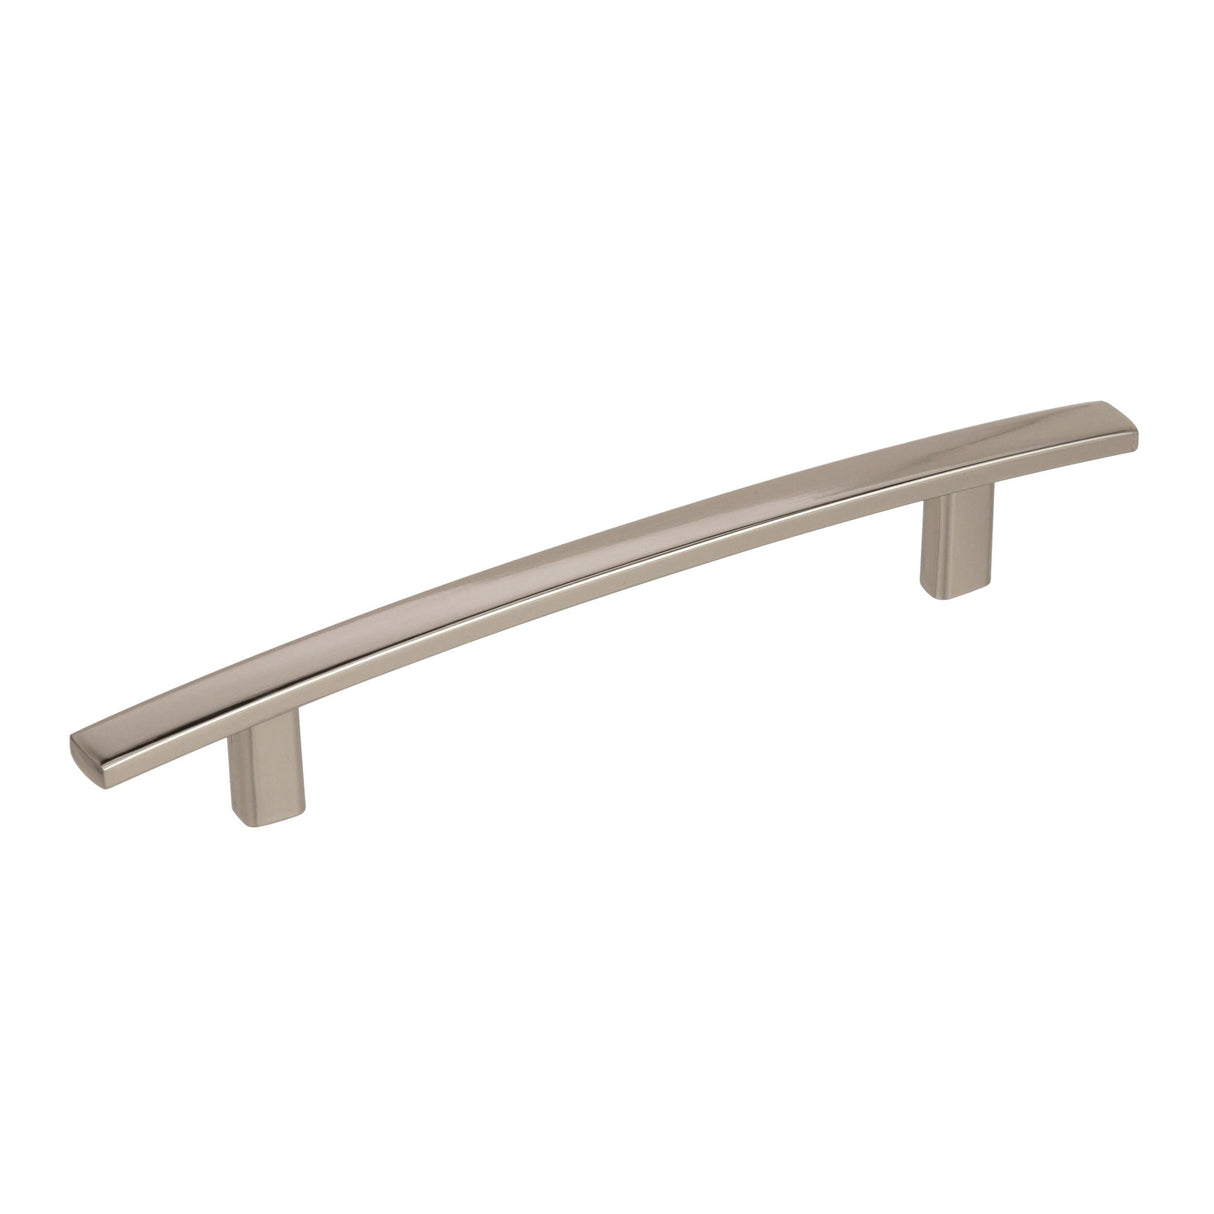 Amerock Cabinet Pull Polished Nickel 5-1/16 inch (128 mm) Center to Center Cyprus 1 Pack Drawer Pull Drawer Handle Cabinet Hardware